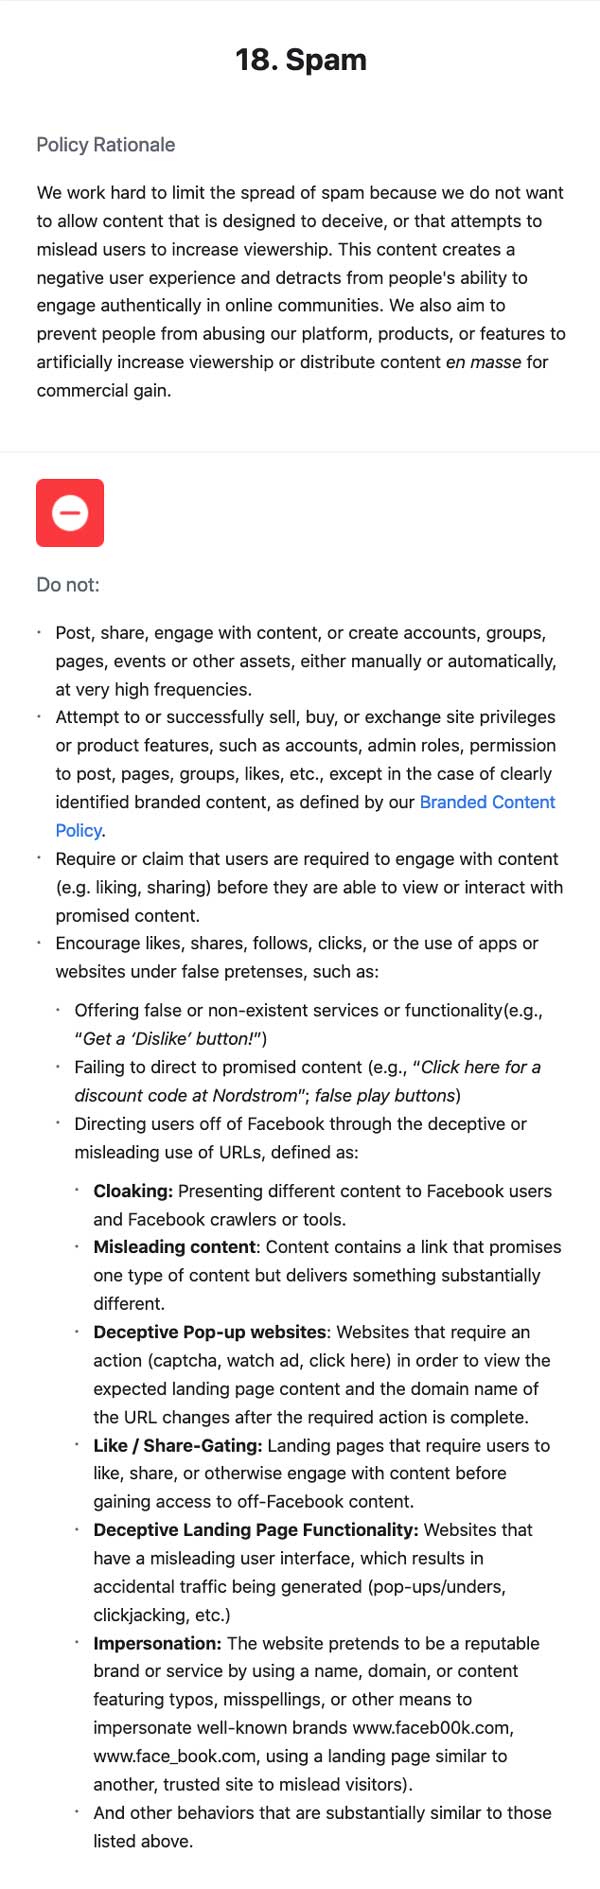 facebooks terms of service section 18 regarding spam